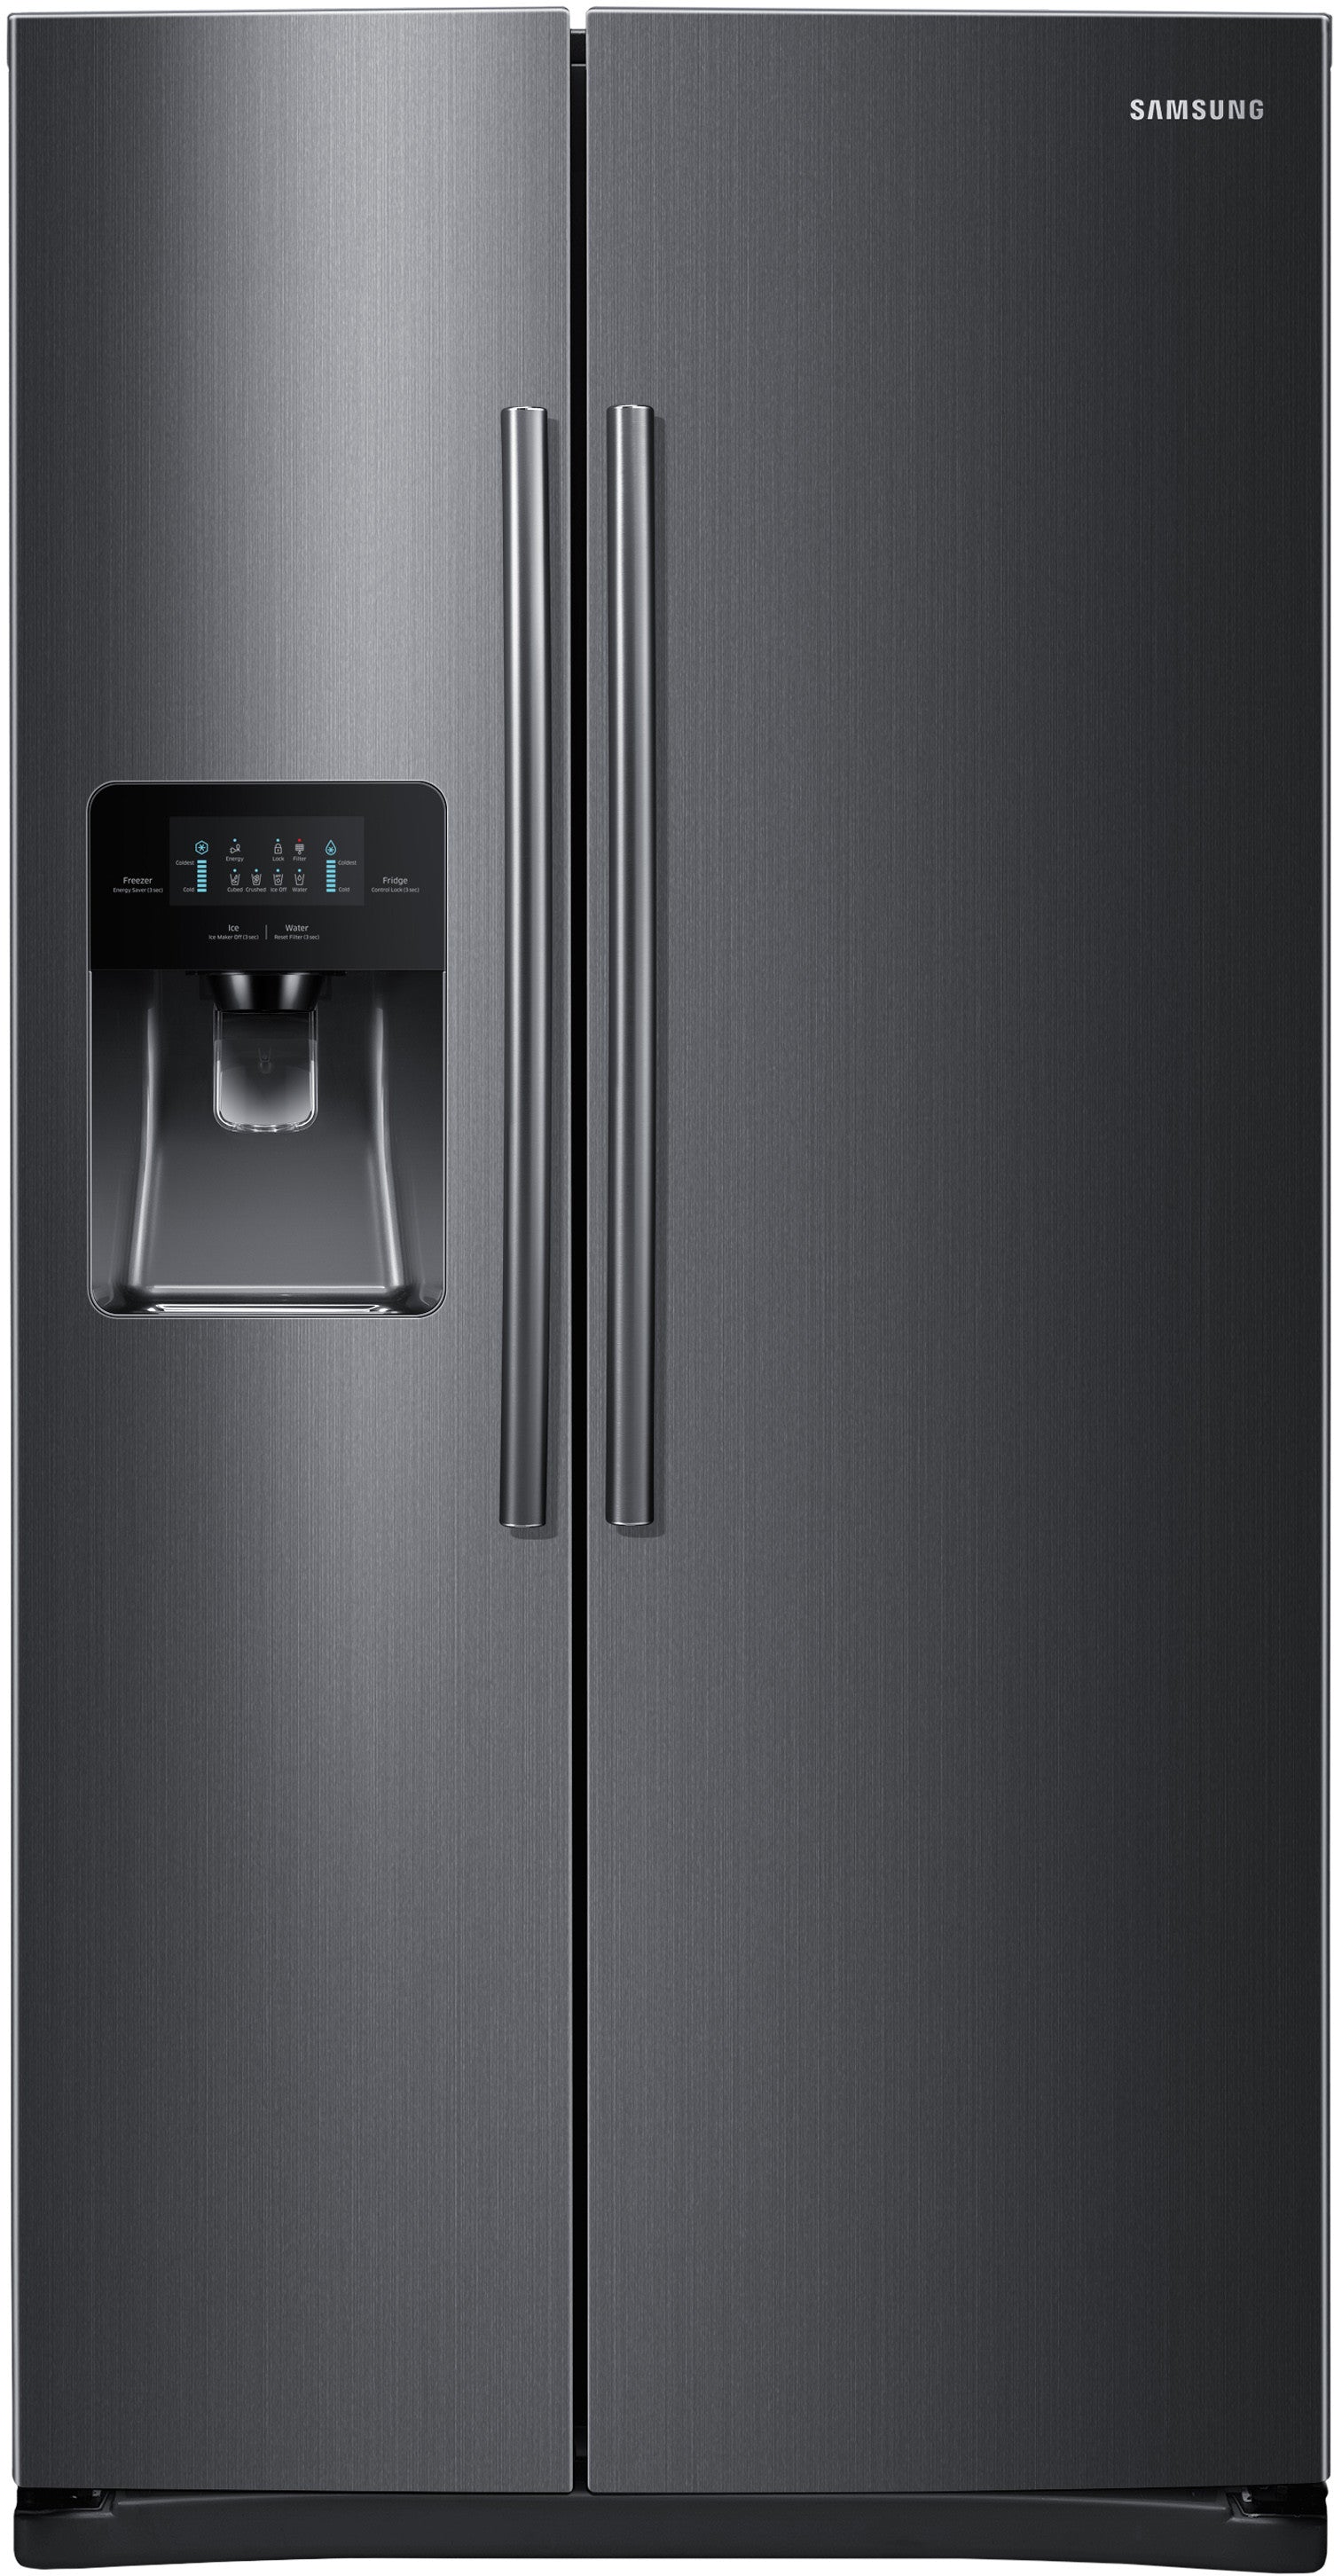 Samsung RS25H5111SG/AA 24.5 Cu. Ft. Side-by-side Refrigerator